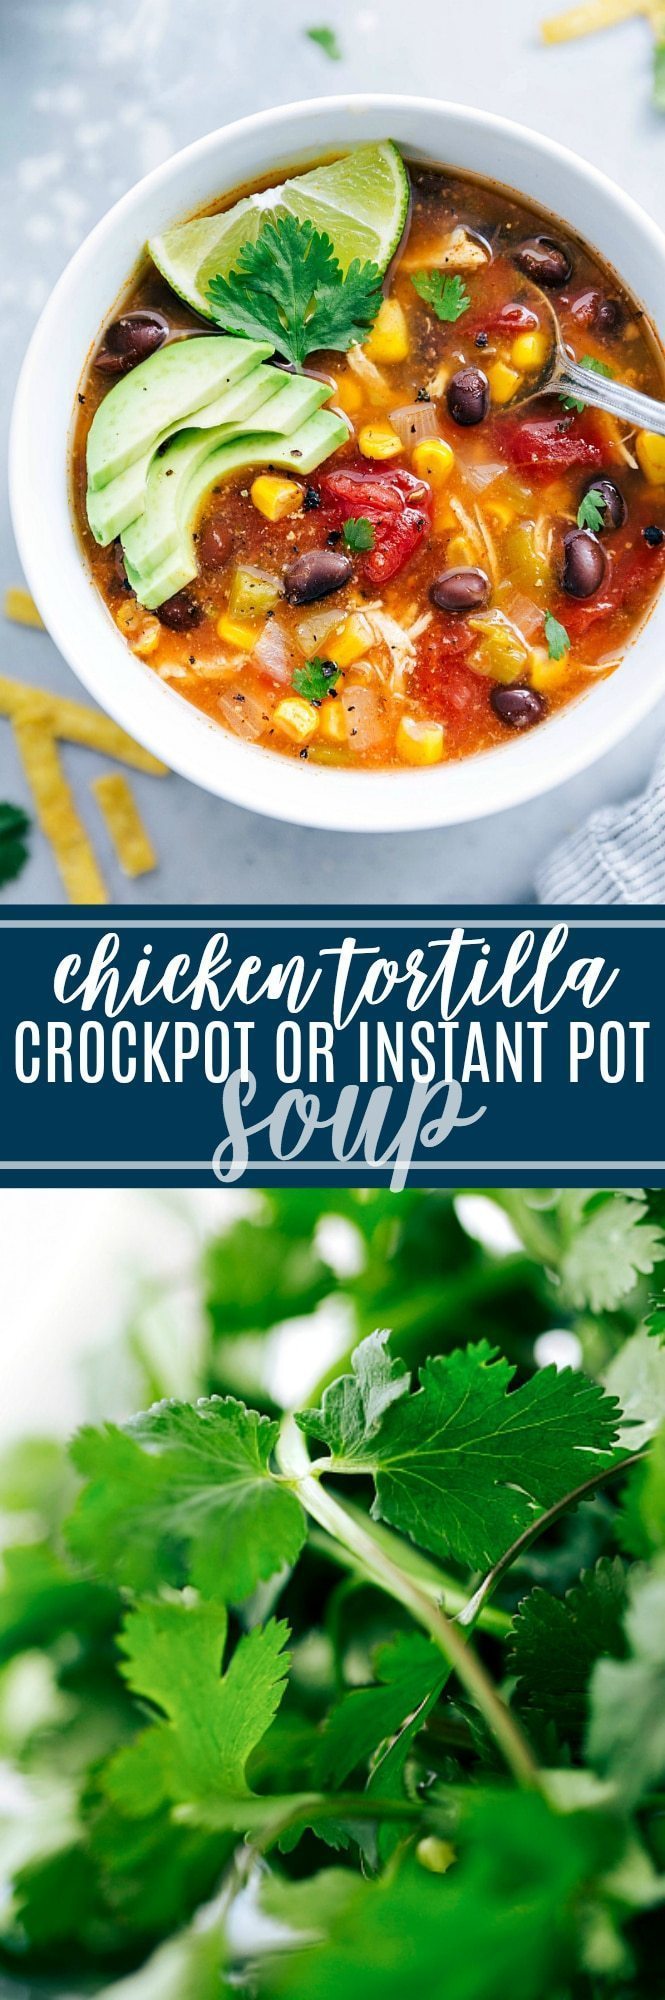 BEST EVER instant pot OR crockpot (tested for both) Mexican Chicken Tortilla Soup I chelseasmessyapron.com I #crockpot #instantpot #tortilla #mexican #chicken #easy #quick #avocado #lime #health #healthy #beans #soup #kidfriendly